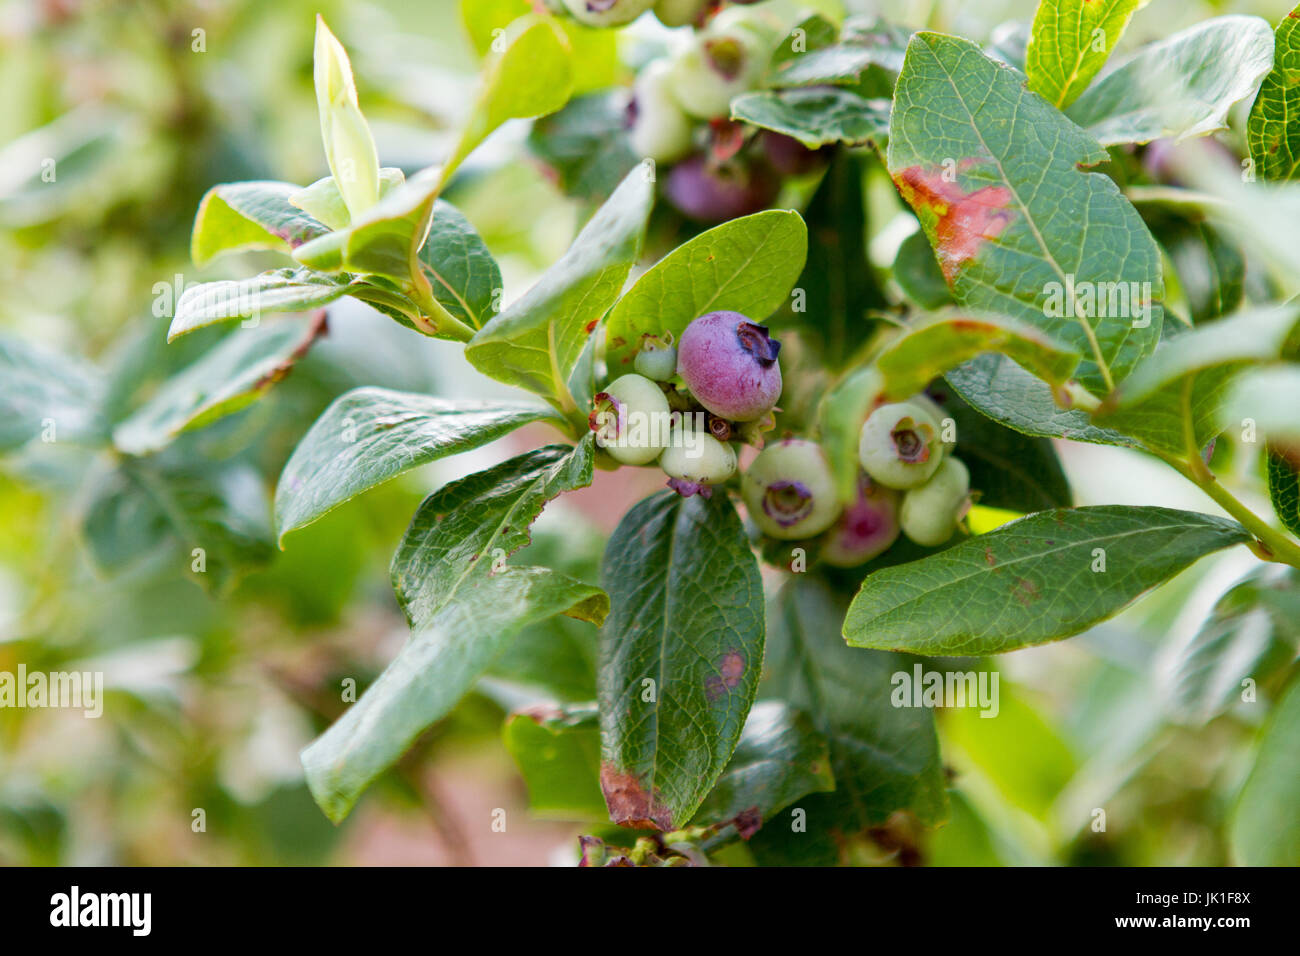 Blueberries on the plant in a closeup Stock Photo